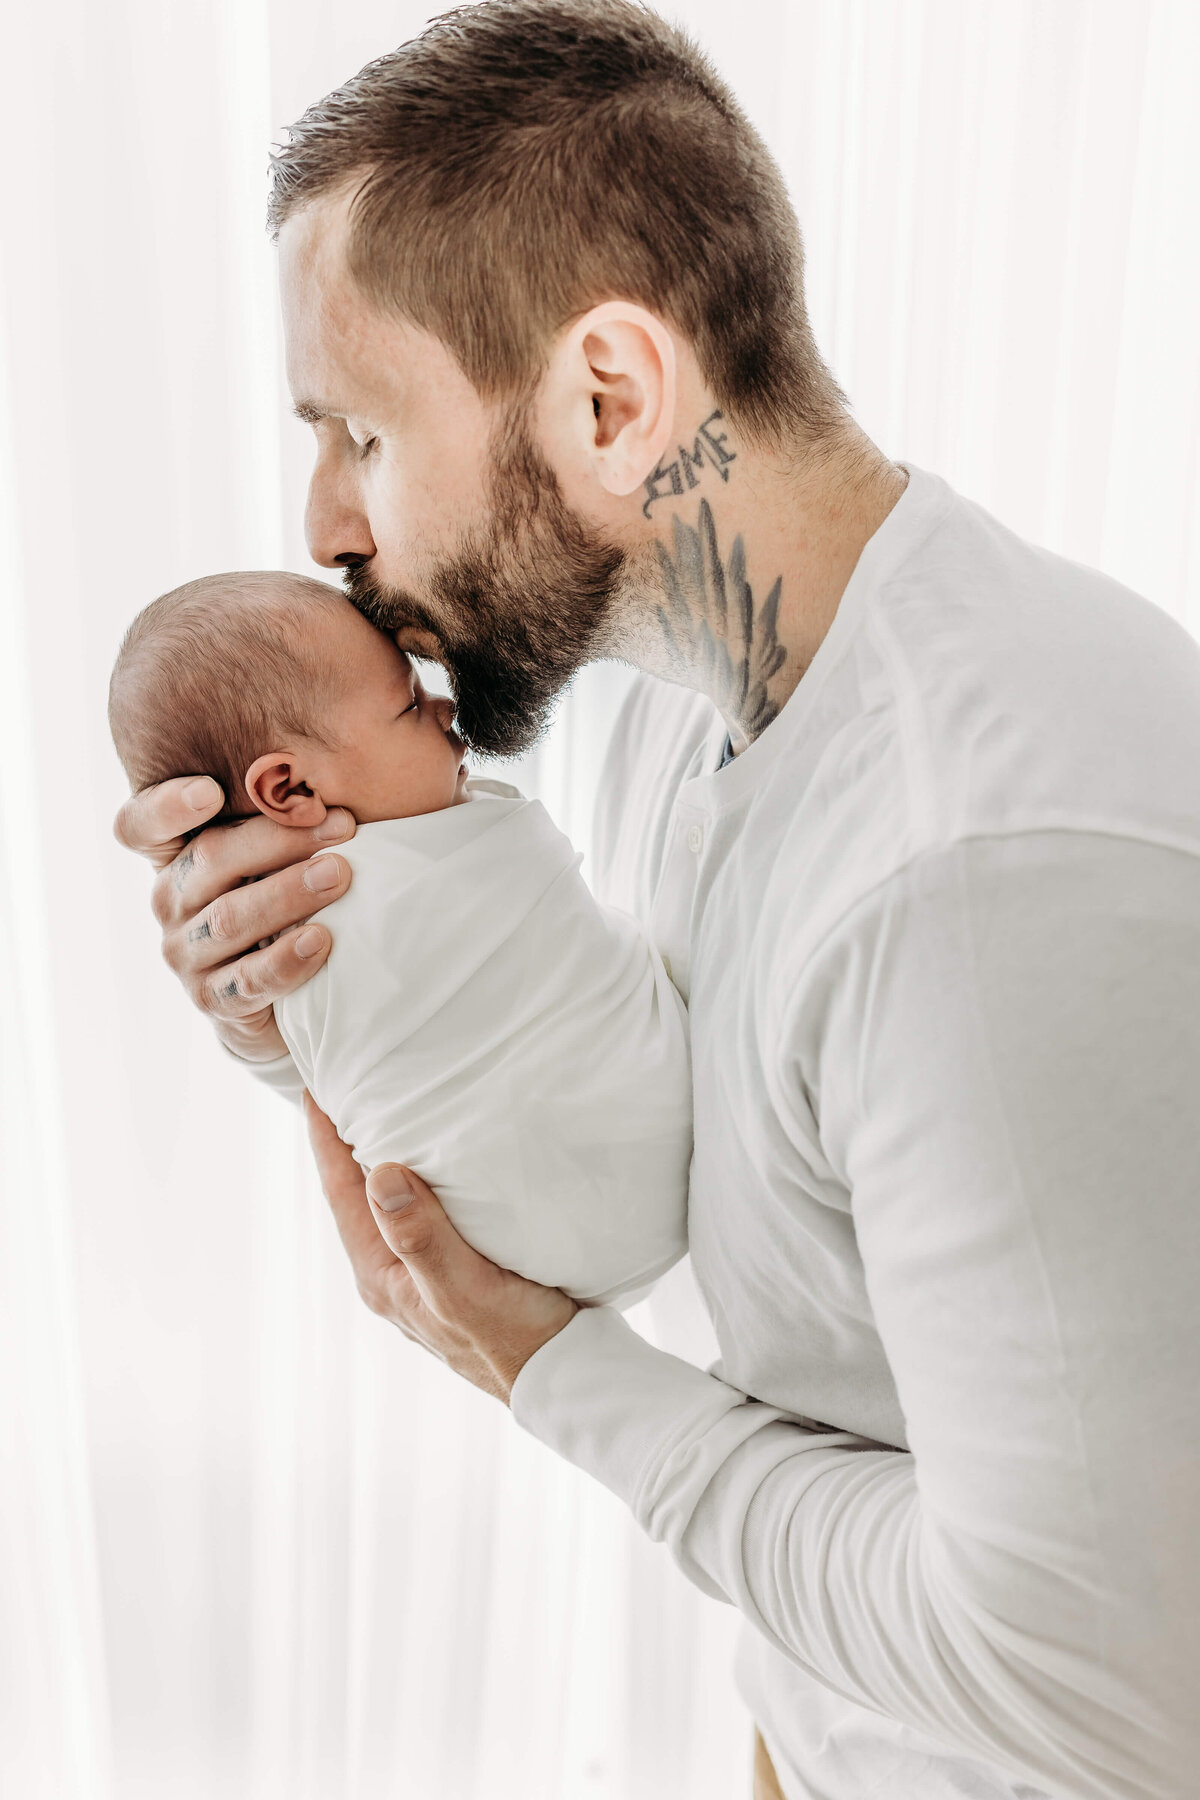 Dad in all white kissing new baby on the head by Luci Levon Photogrpahy